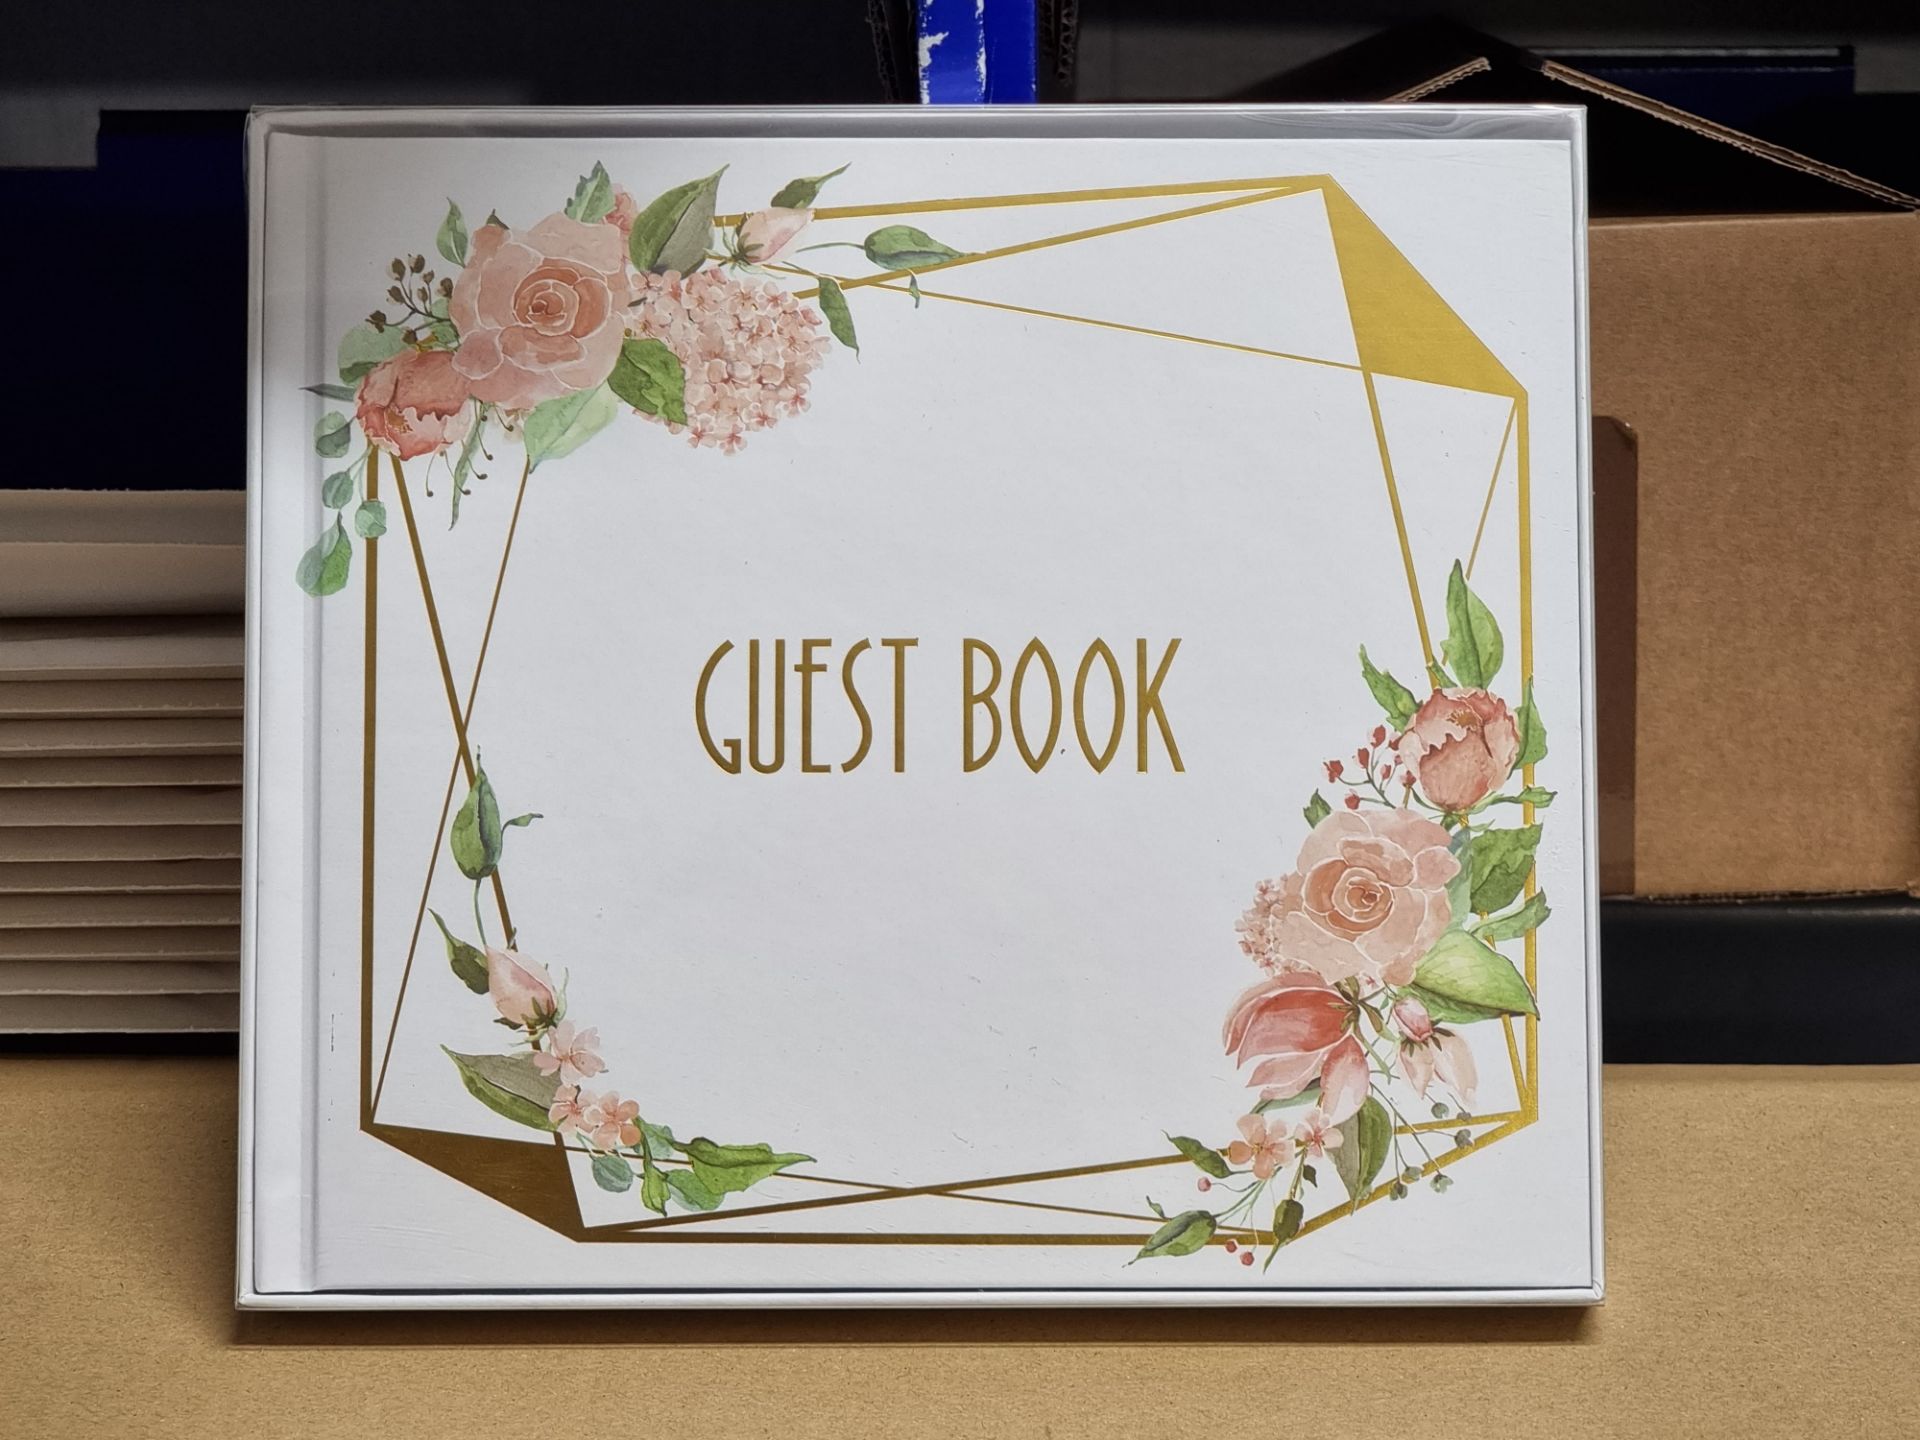 80 x Geo Floral Guest Books | Boxed